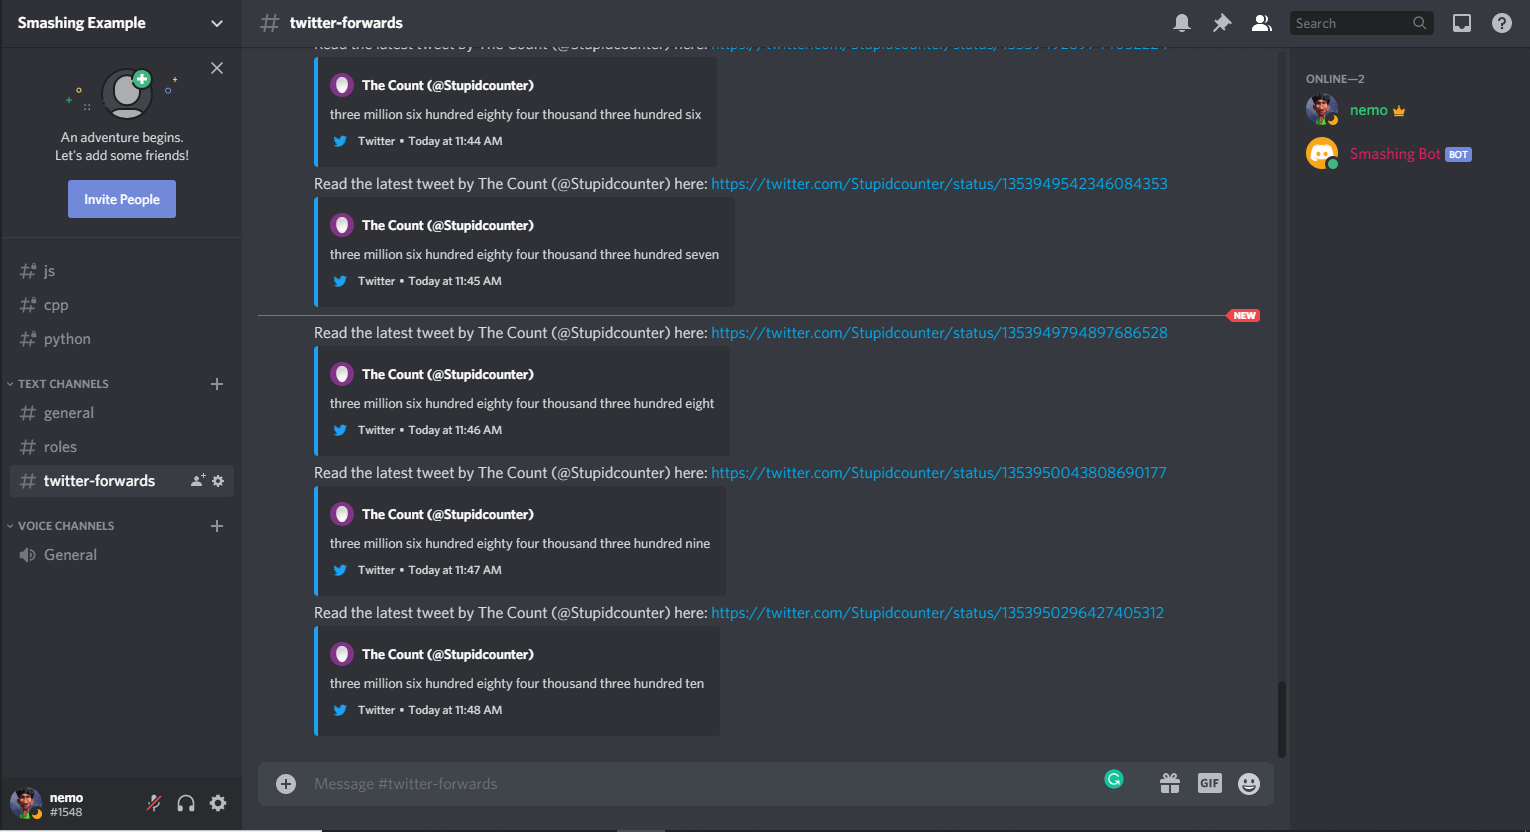 How to Connect a Bot to Discord